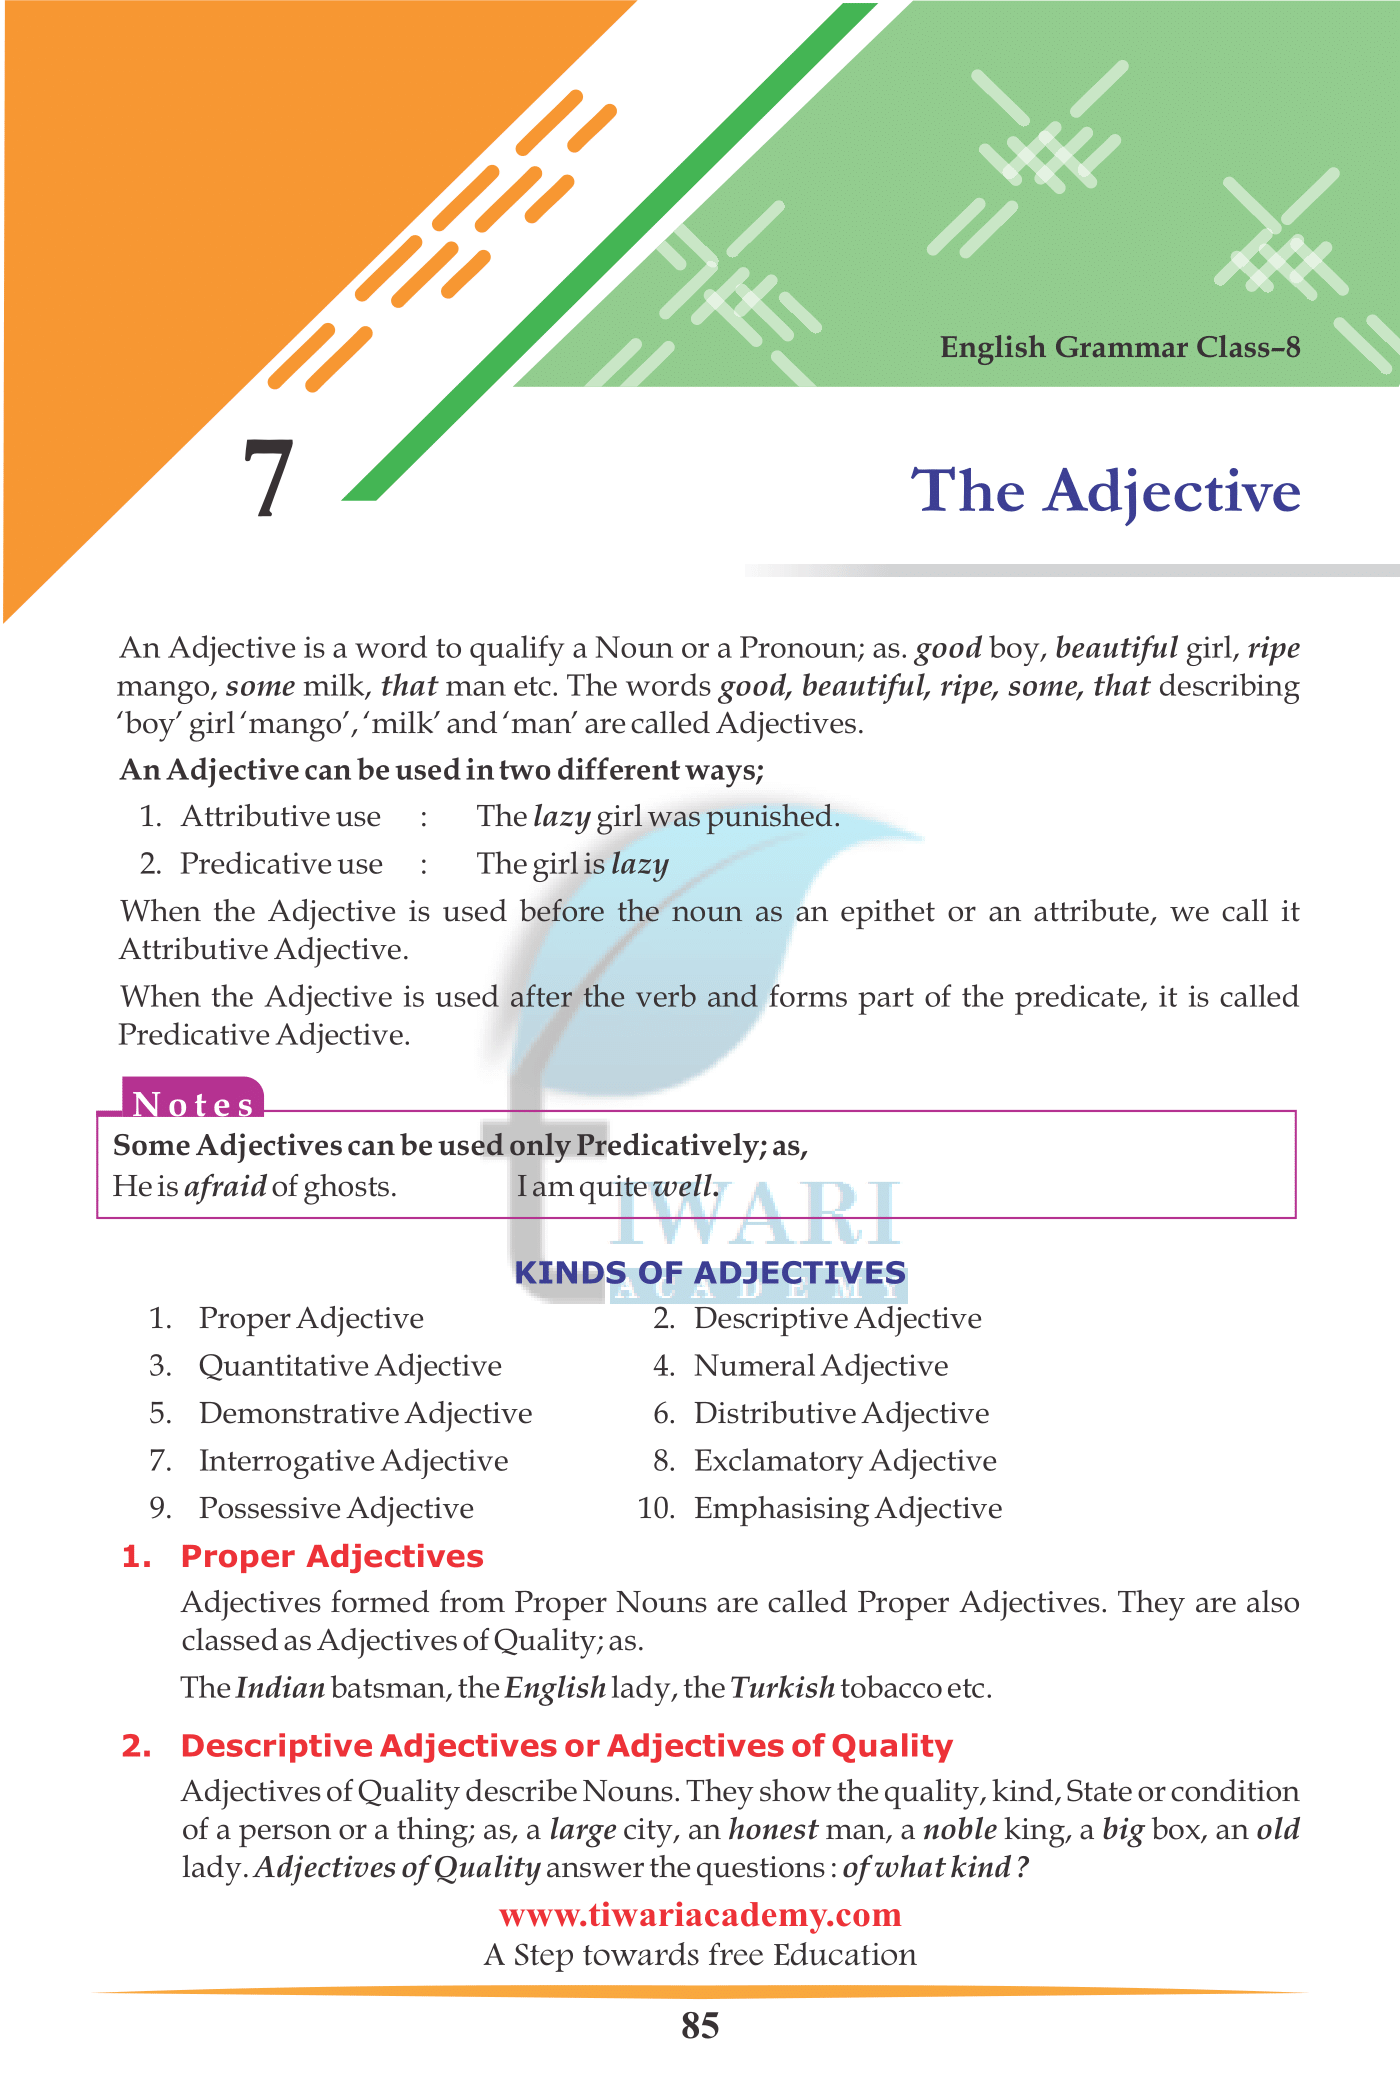 Class 8 English Grammar Chapter 7 The Adjective for 2022-2023